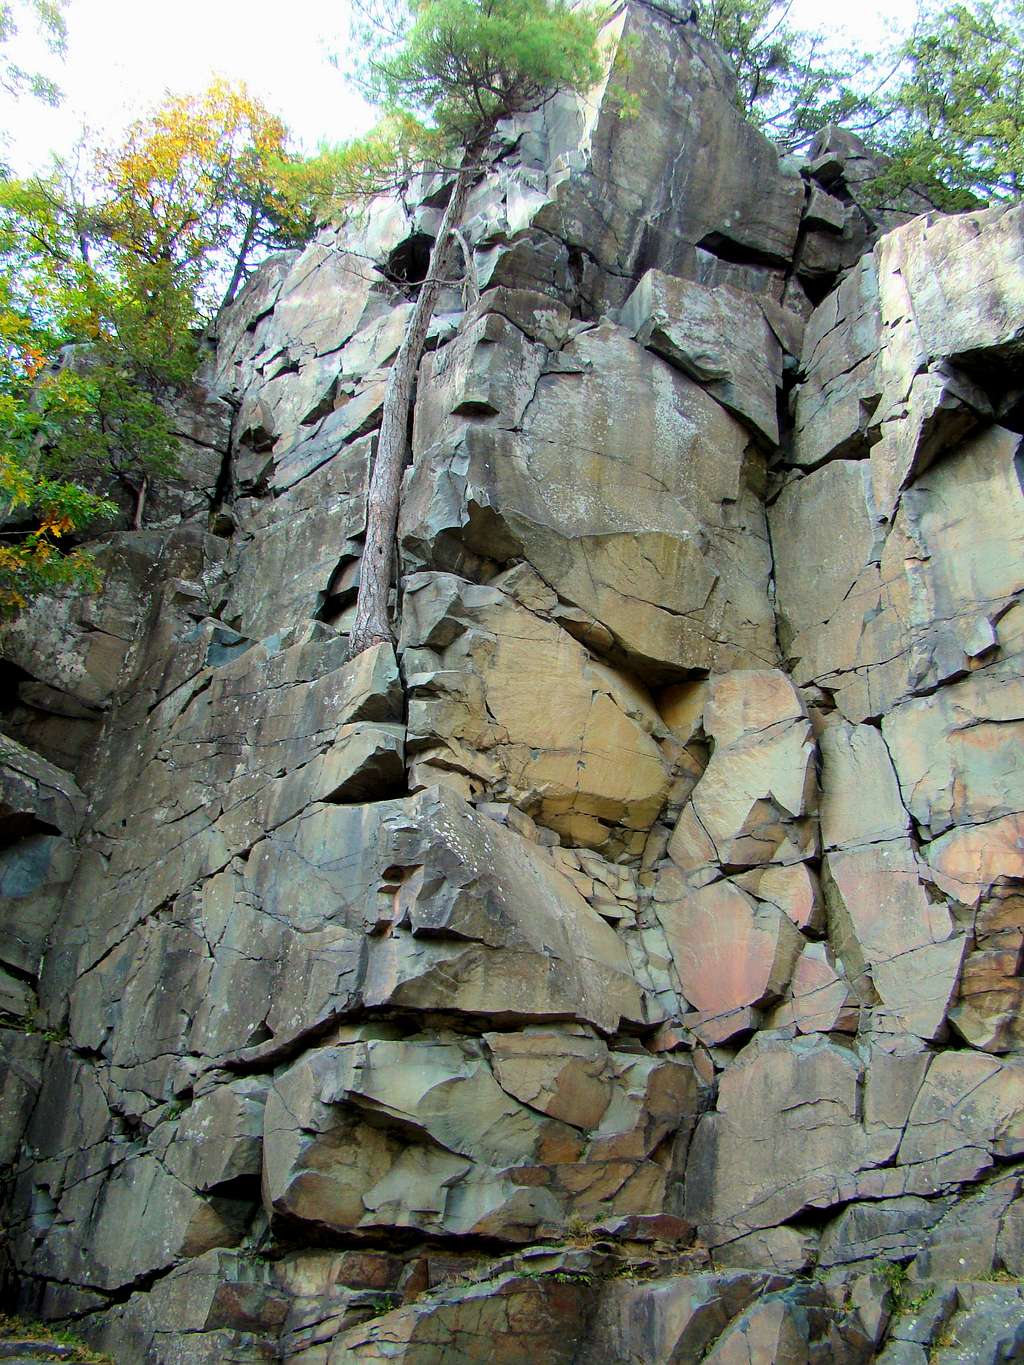 One of Many Rock Climbing Challenges